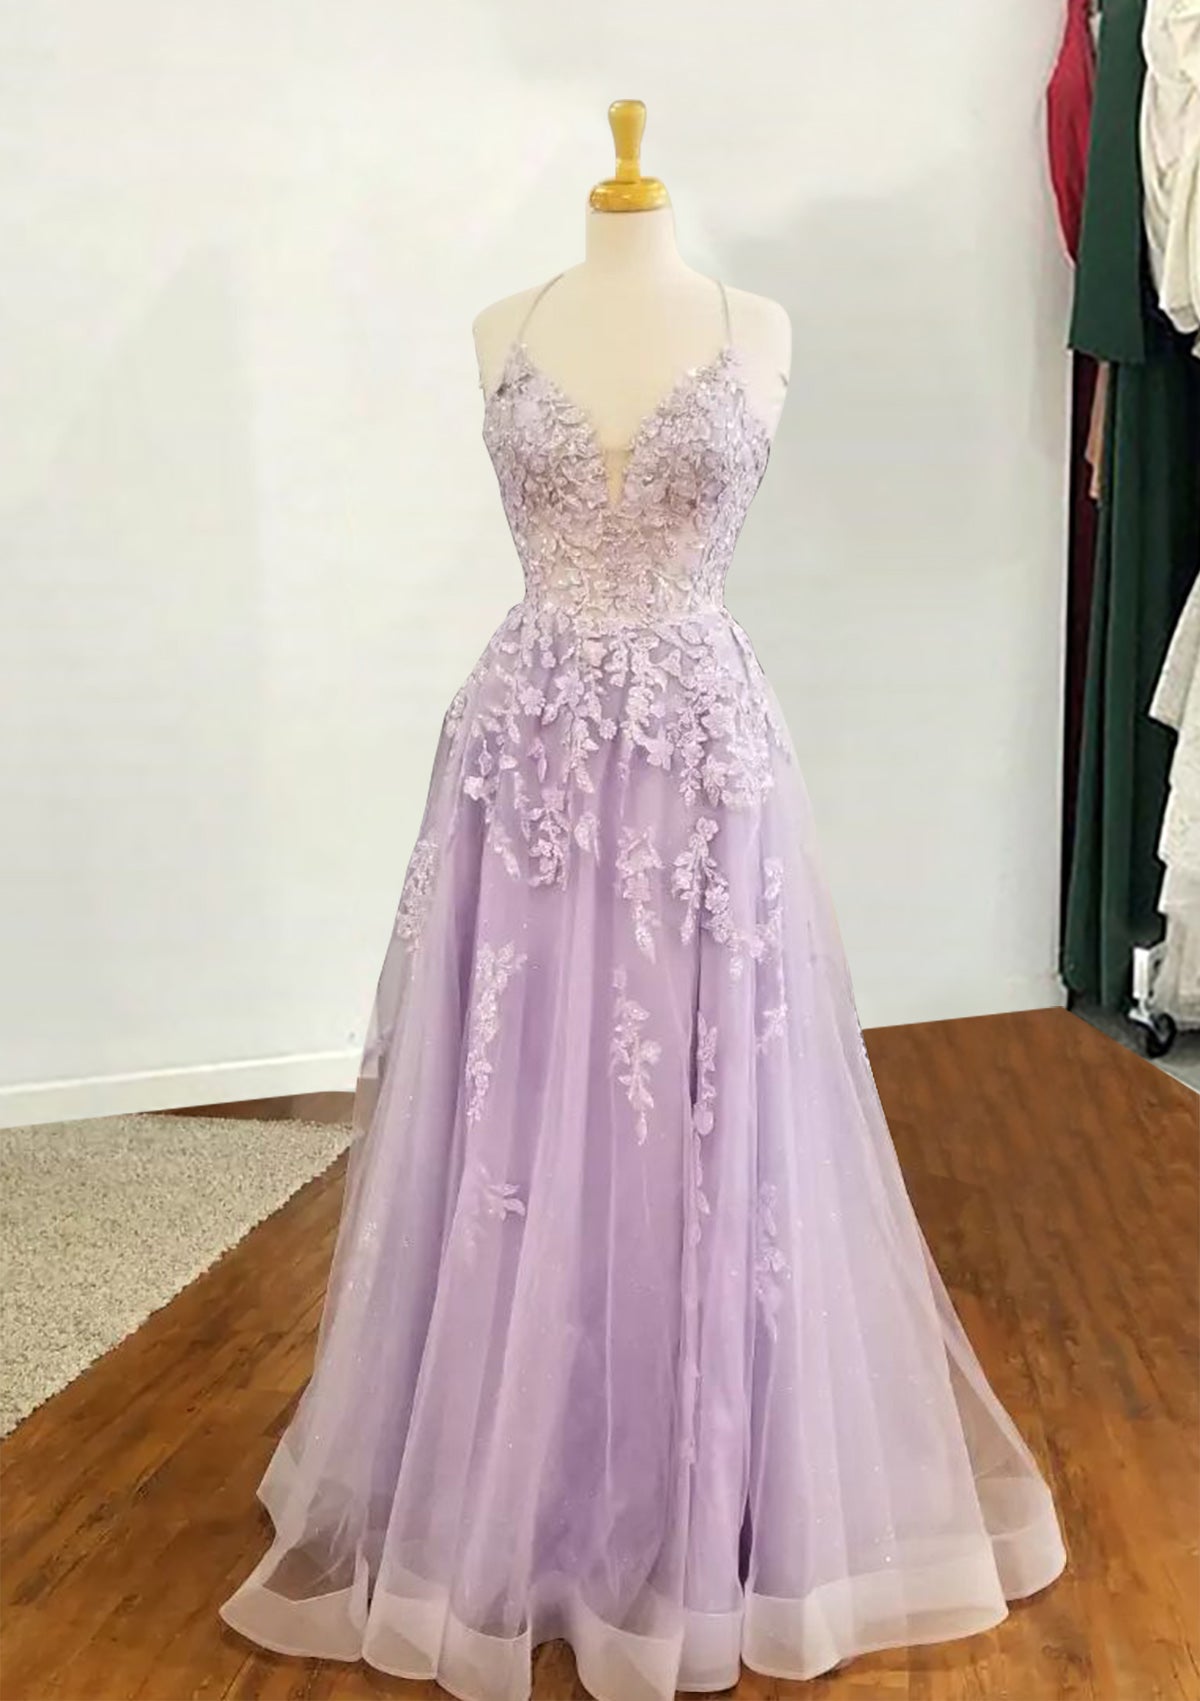 Lilac Prom Dresses, A-line V Neck Spaghetti Straps Long/Floor-Length Tulle Prom Dress With Appliqued Sequins